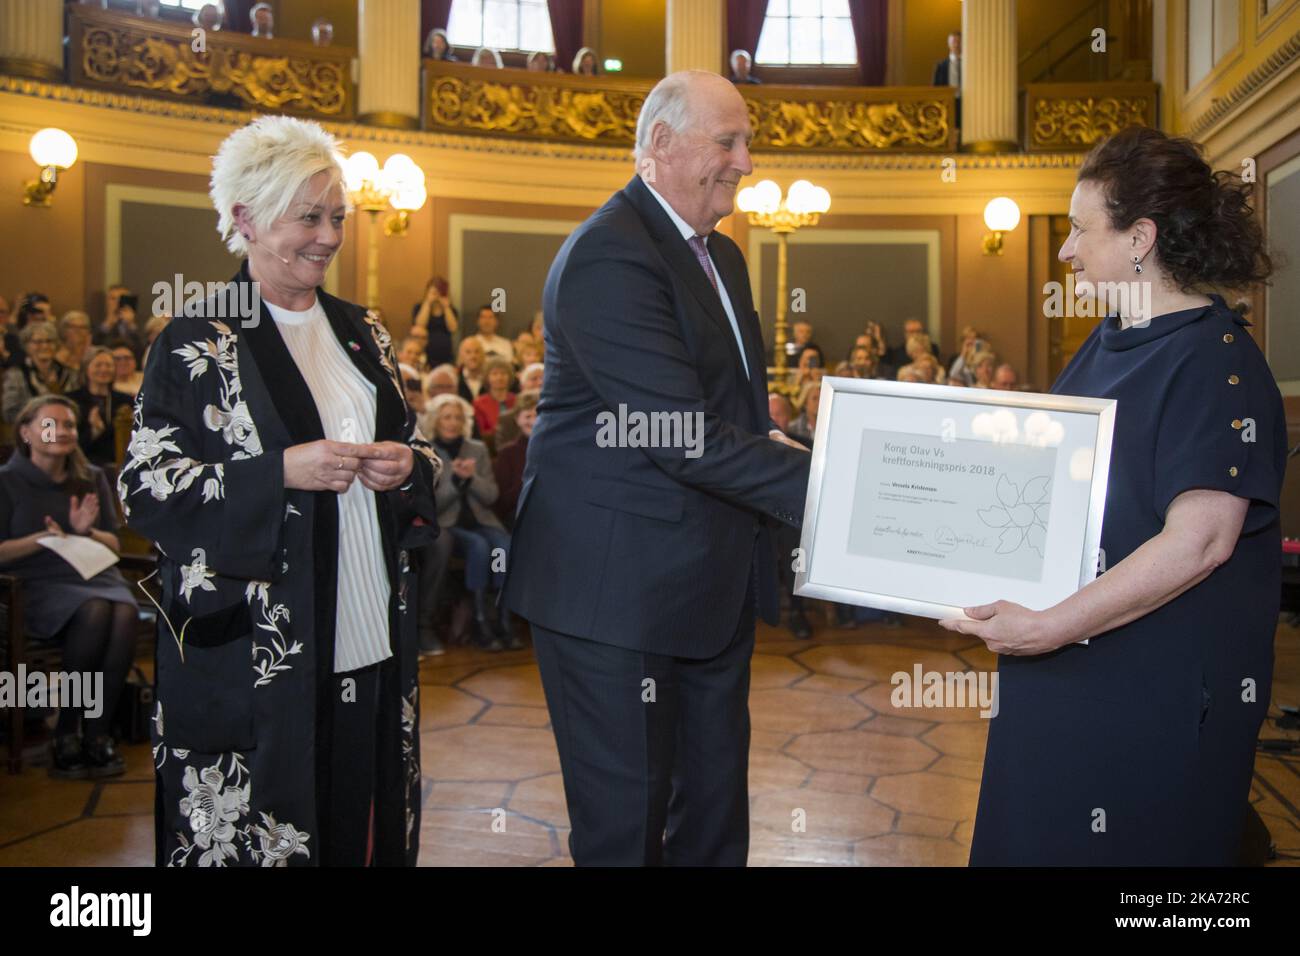 Oslo, Norway 20180416. King Harald presents Professor Vessela Kristensen (UiO) Kong Olav Vs Cancer Research Prize for 2018 at the University's Old Hall Monday. The Cancer Research Prize is awarded by the Cancer Society to researchers who have distinguished themselves through years of efforts for a better life for many people. General Secretary of the Cancer Society Anne Lise Ryel left.. Photo: Heiko Junge / NTB scanpix Stock Photo